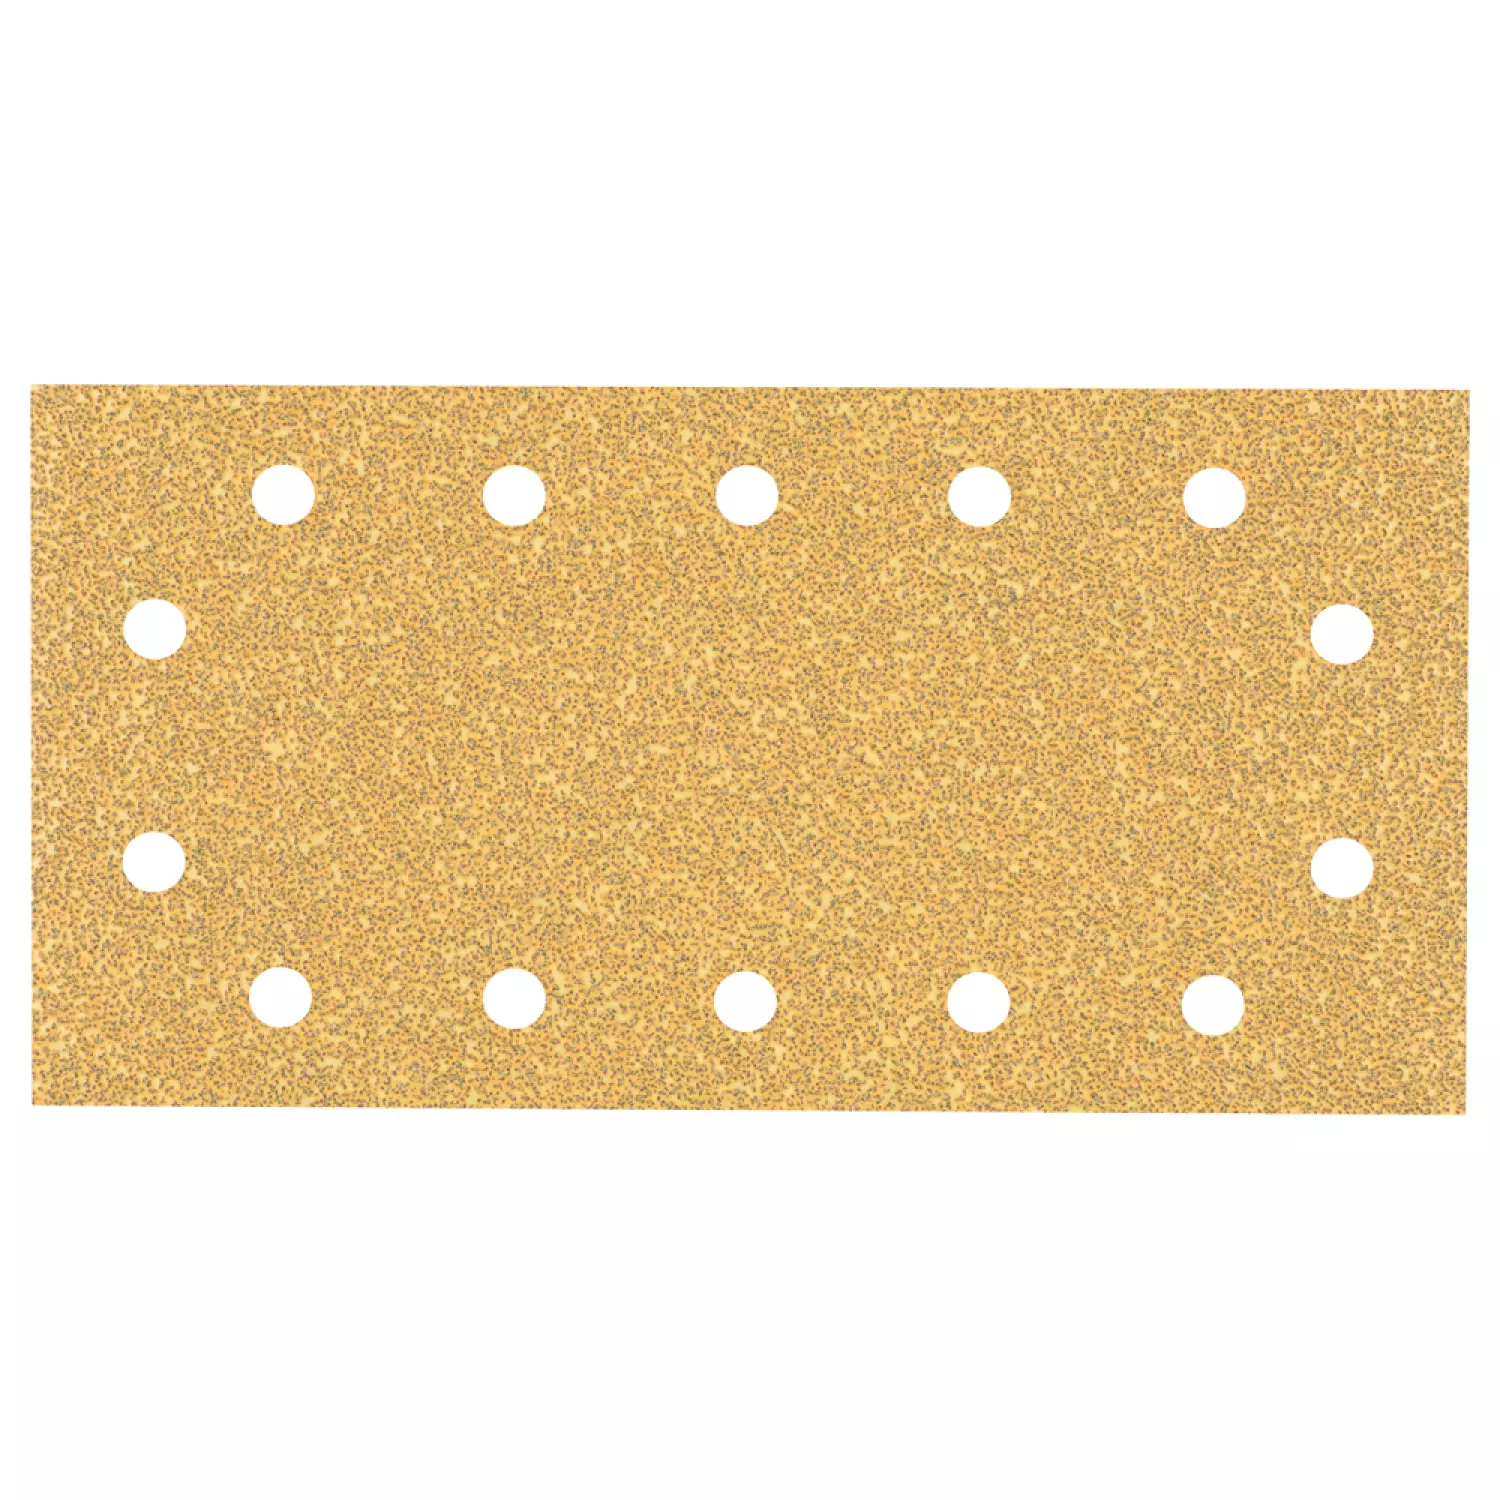 Bosch 2608900860 Feuille rectangulaire abrasive-image